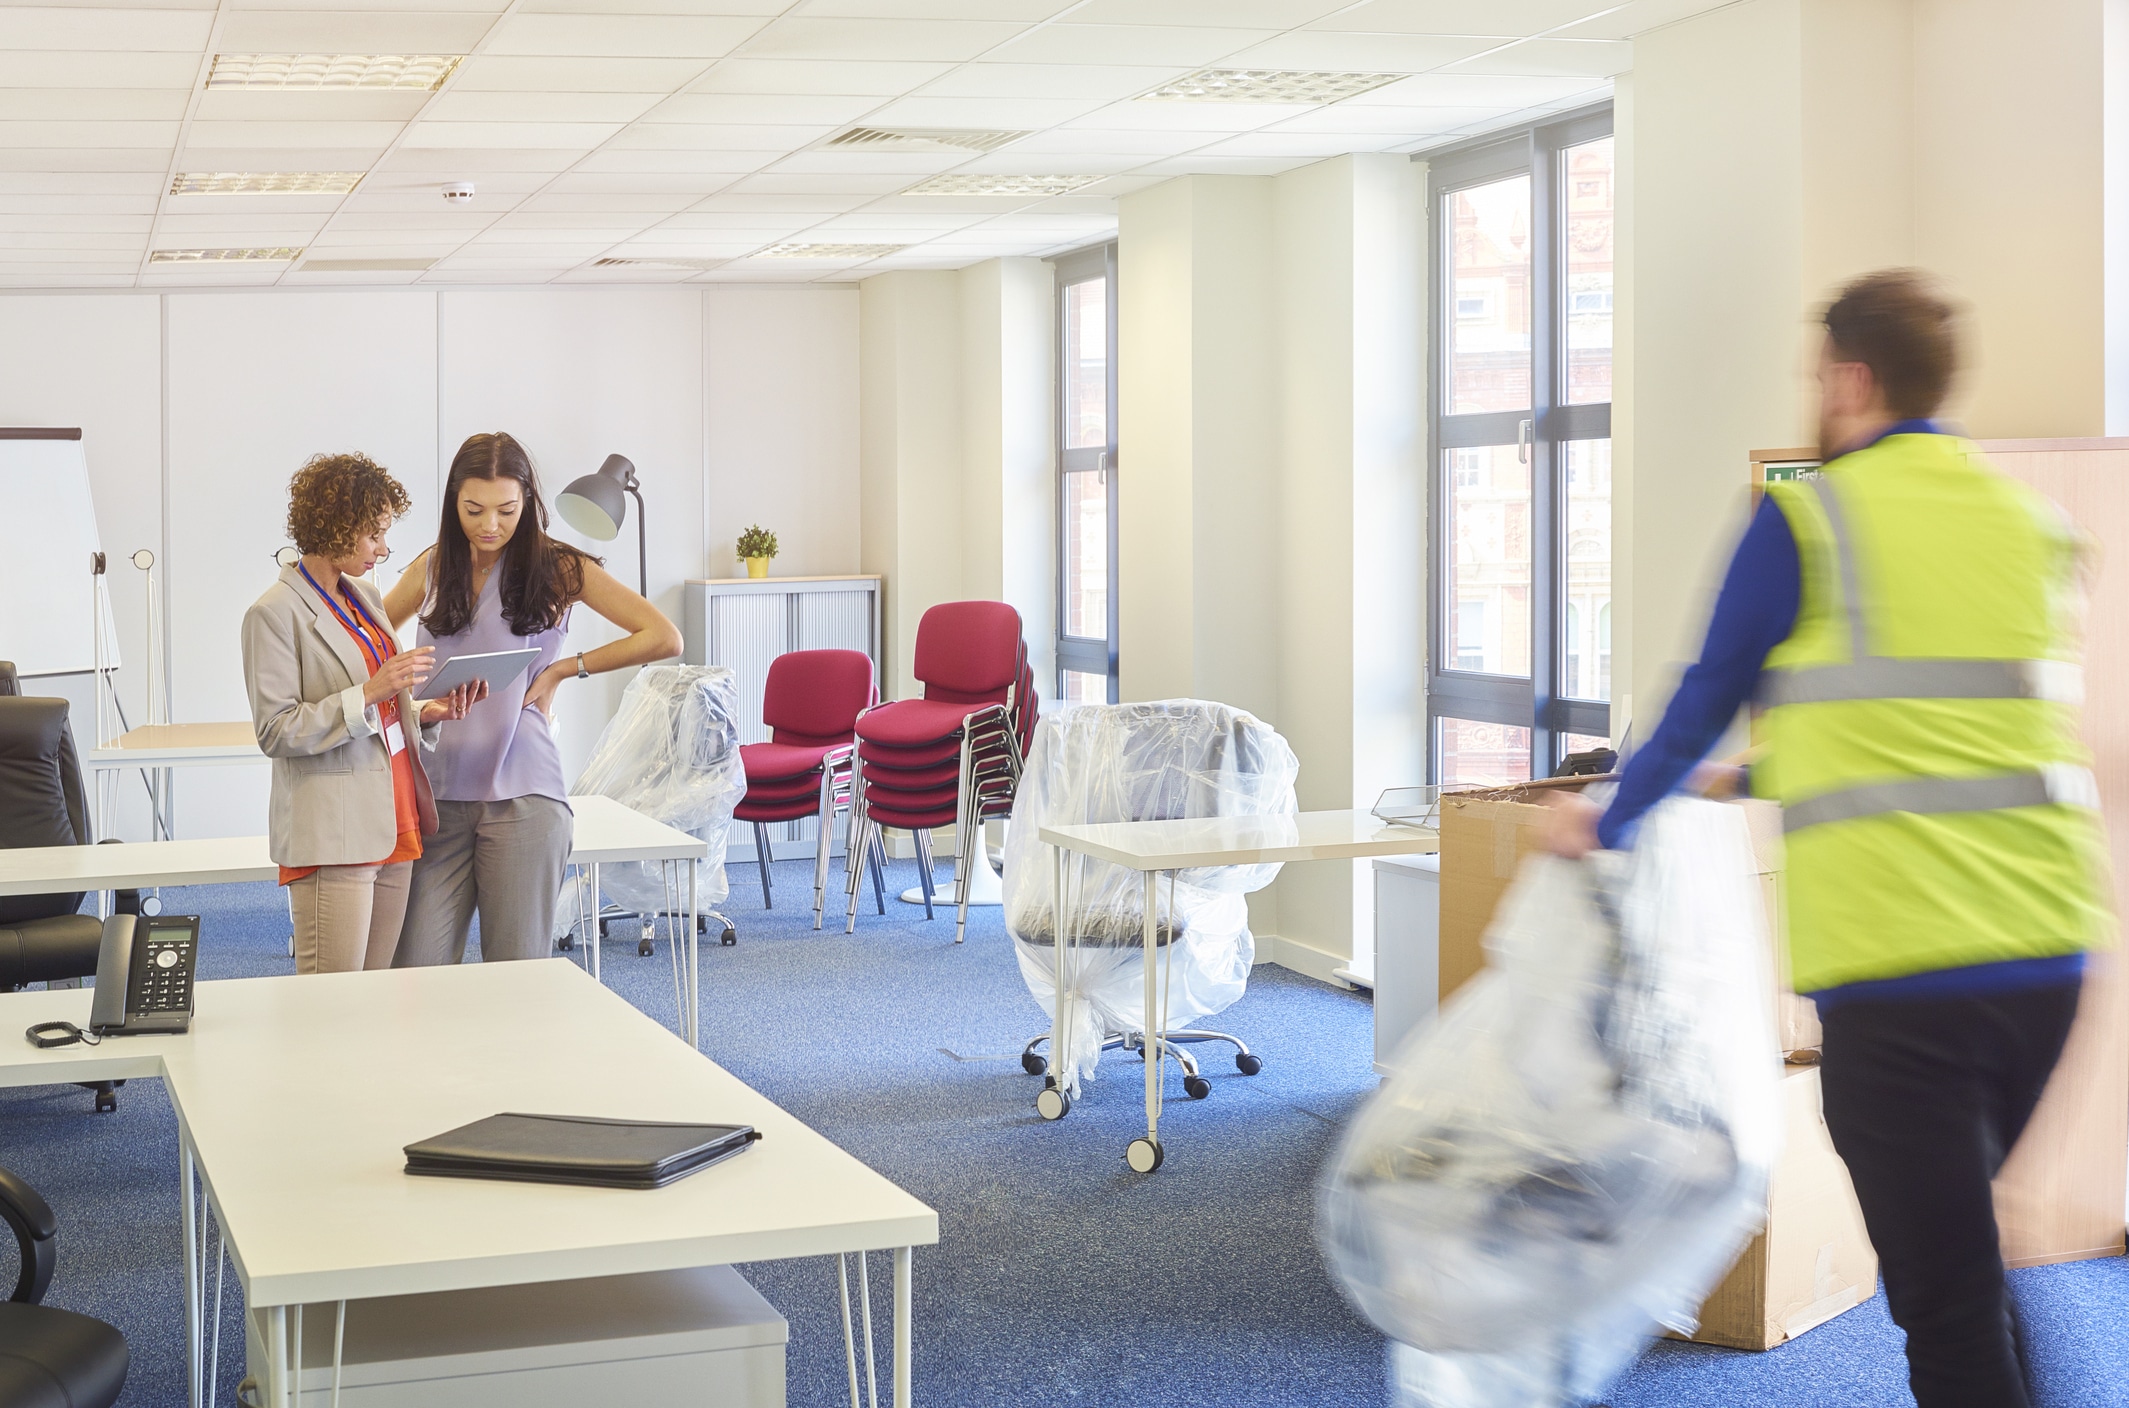 5 Things to consider when preparing for an office relocation